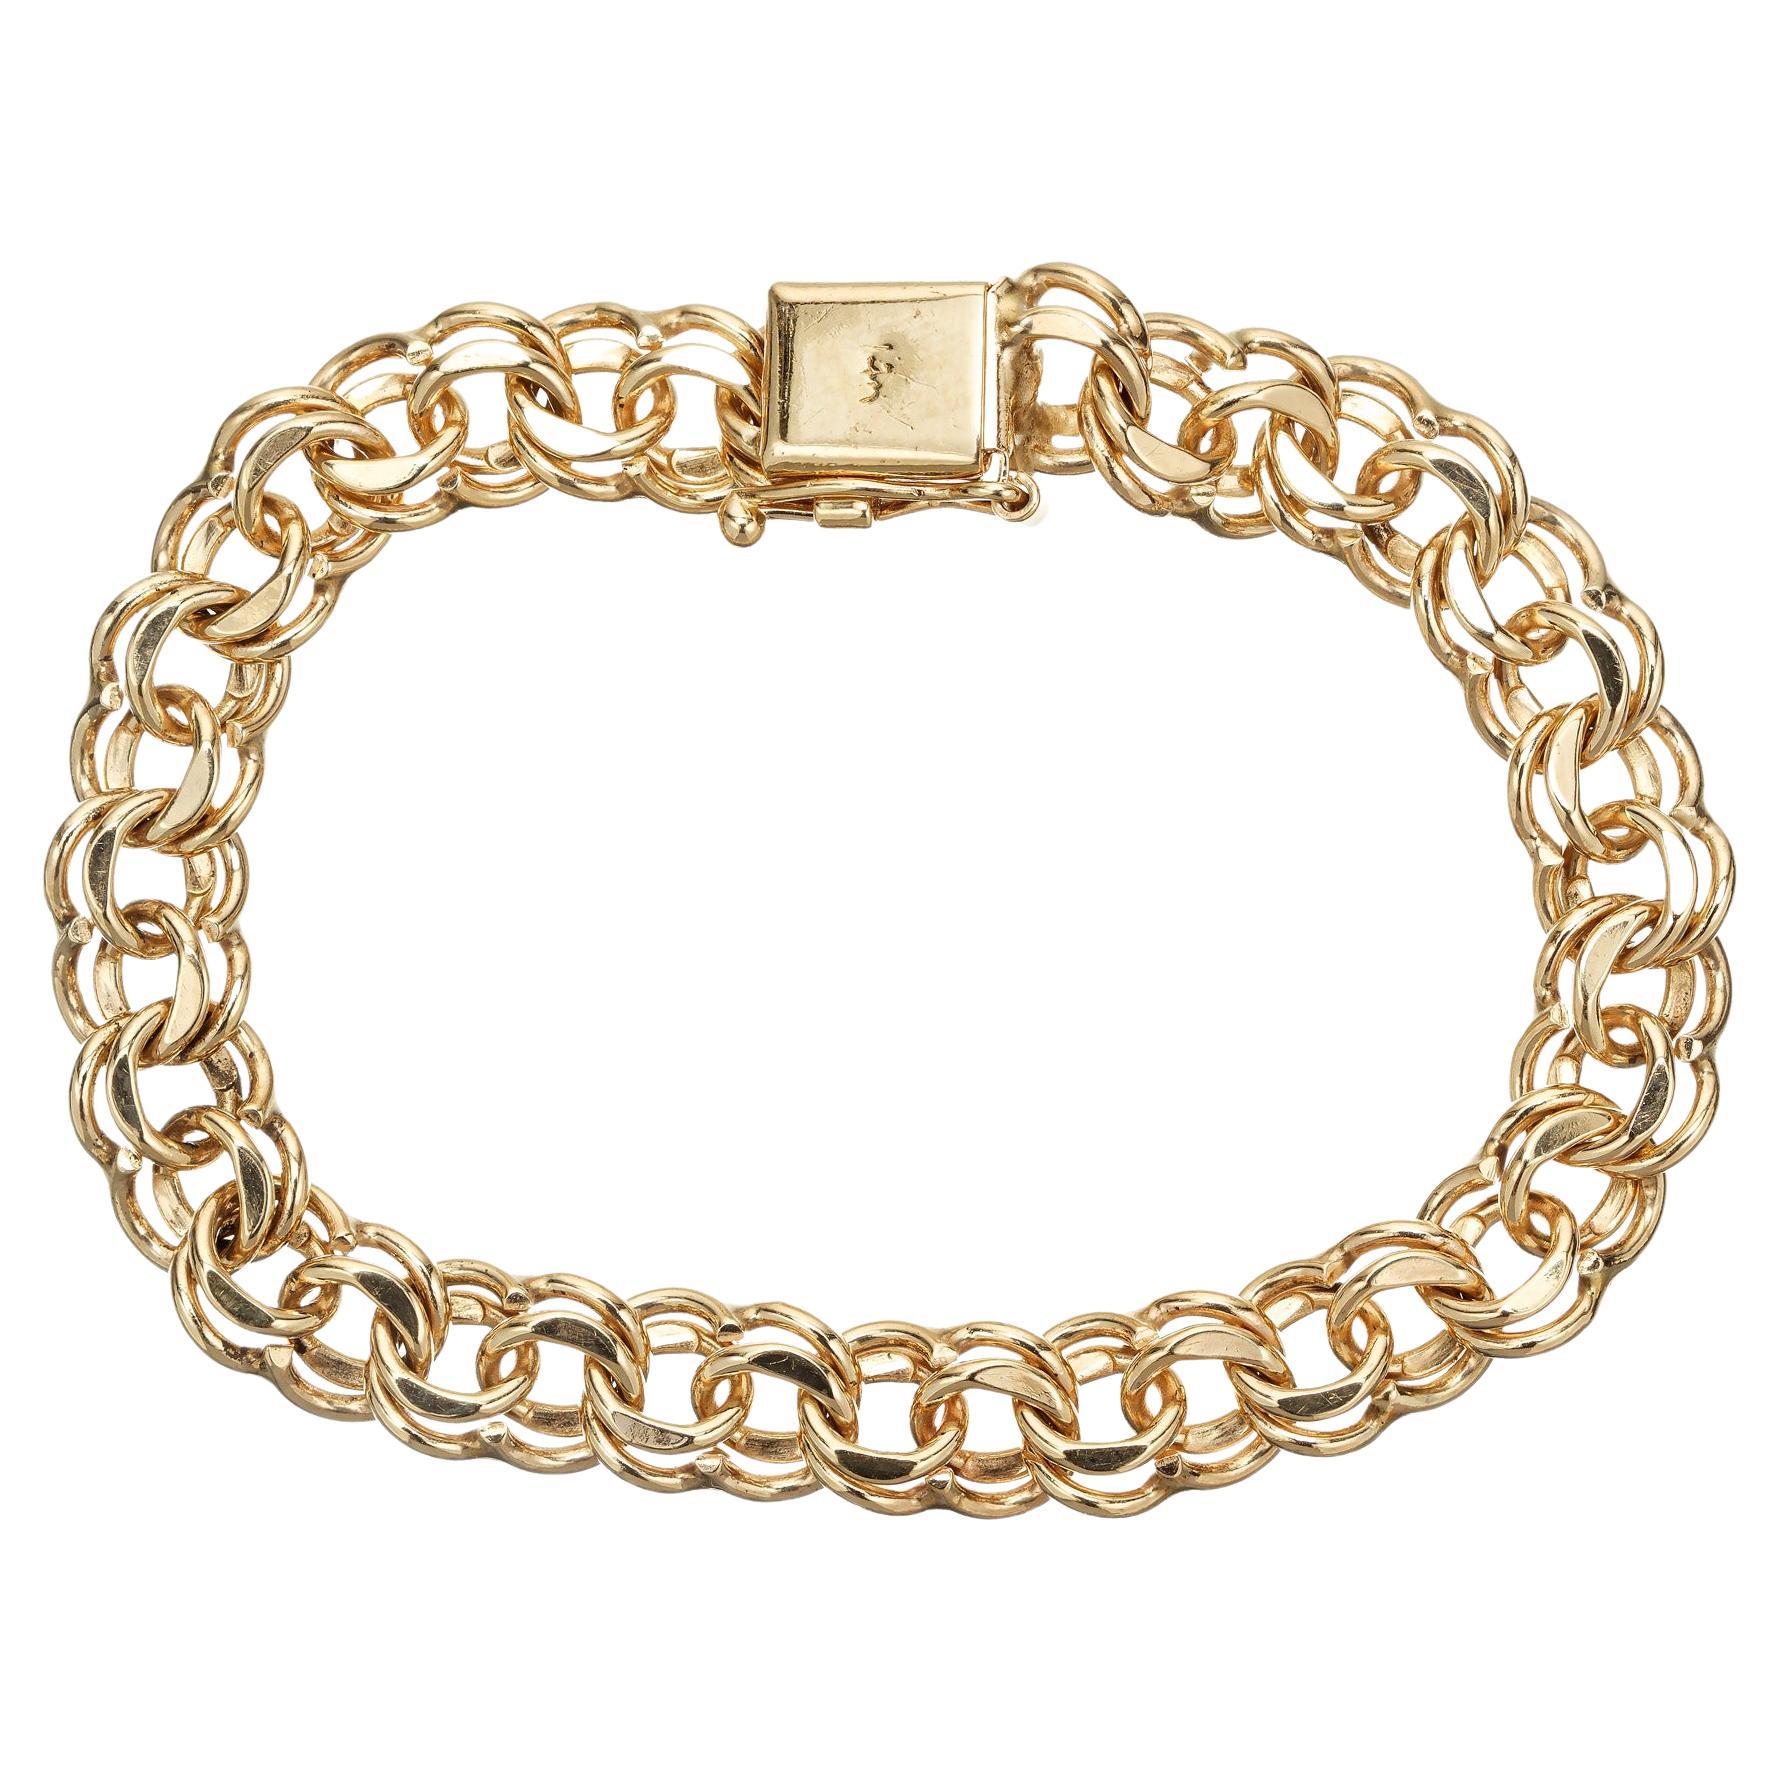 Classic mid-century 1960's 14k yellow gold 9mm wide double link construction, making it a perfect accessory for both casual and formal occasions. With its sturdy clasp, at 7.75 inches in length, this bracelet ensures a secure and comfortable fit on